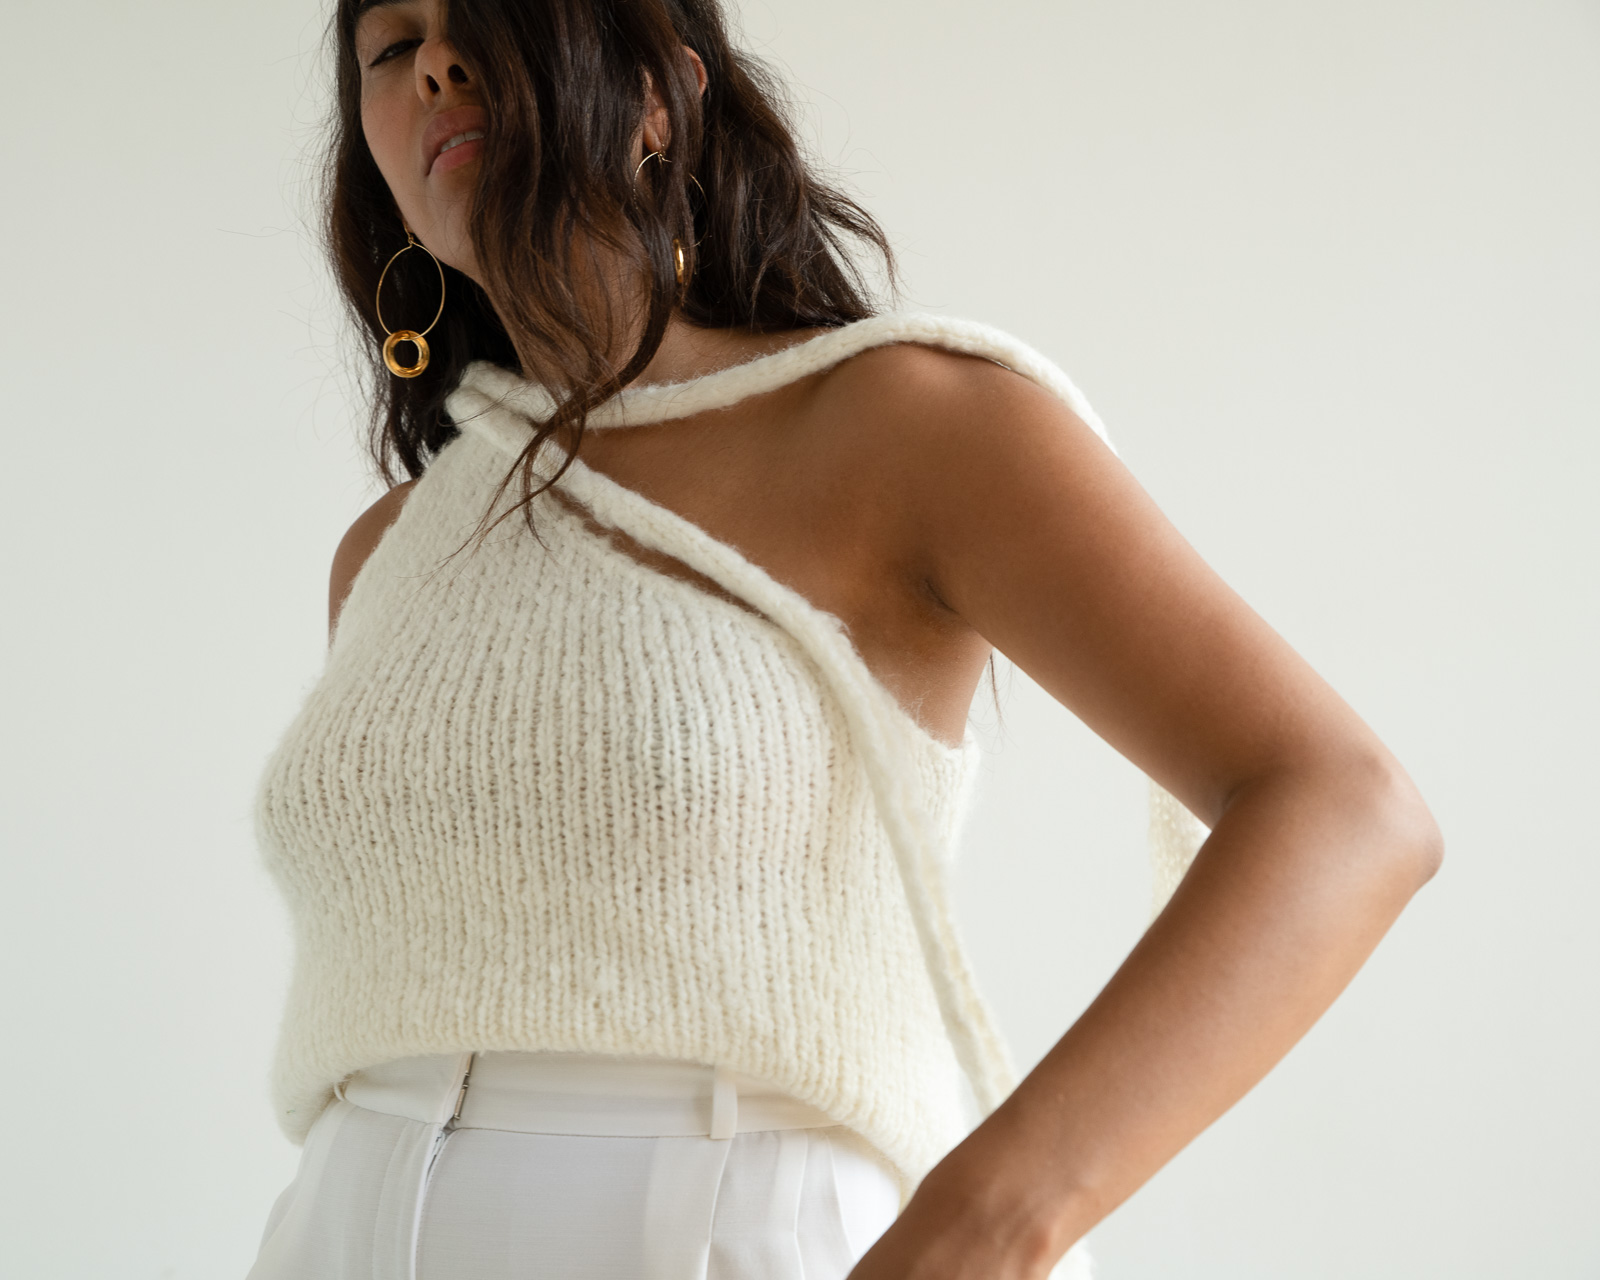 Storm wes wears malaika Raiss white knit top with gold earrings ss20